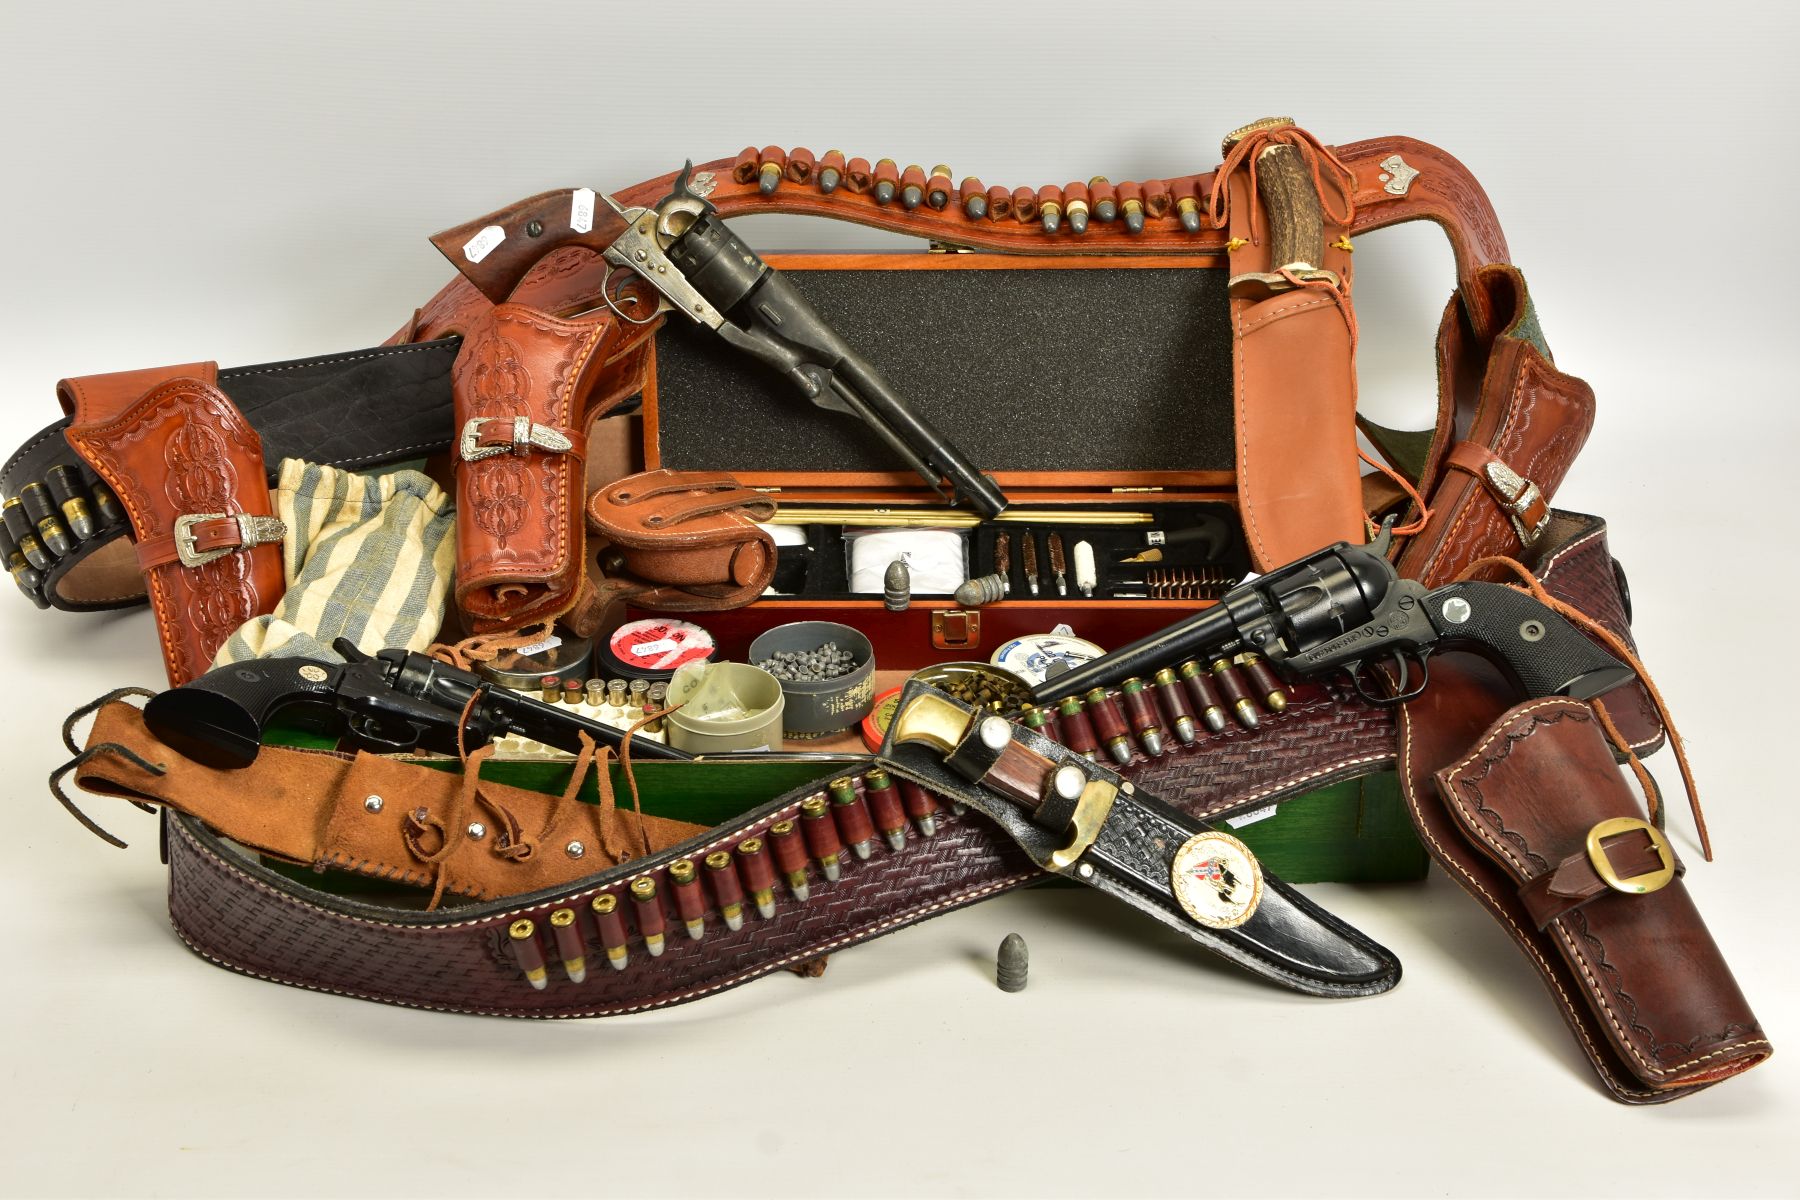 A NUMBER OF ITEMS DESIGNED FOR USE BY A MEMBER OF A RE-ENACTMENT GROUP, it consists of: three tooled